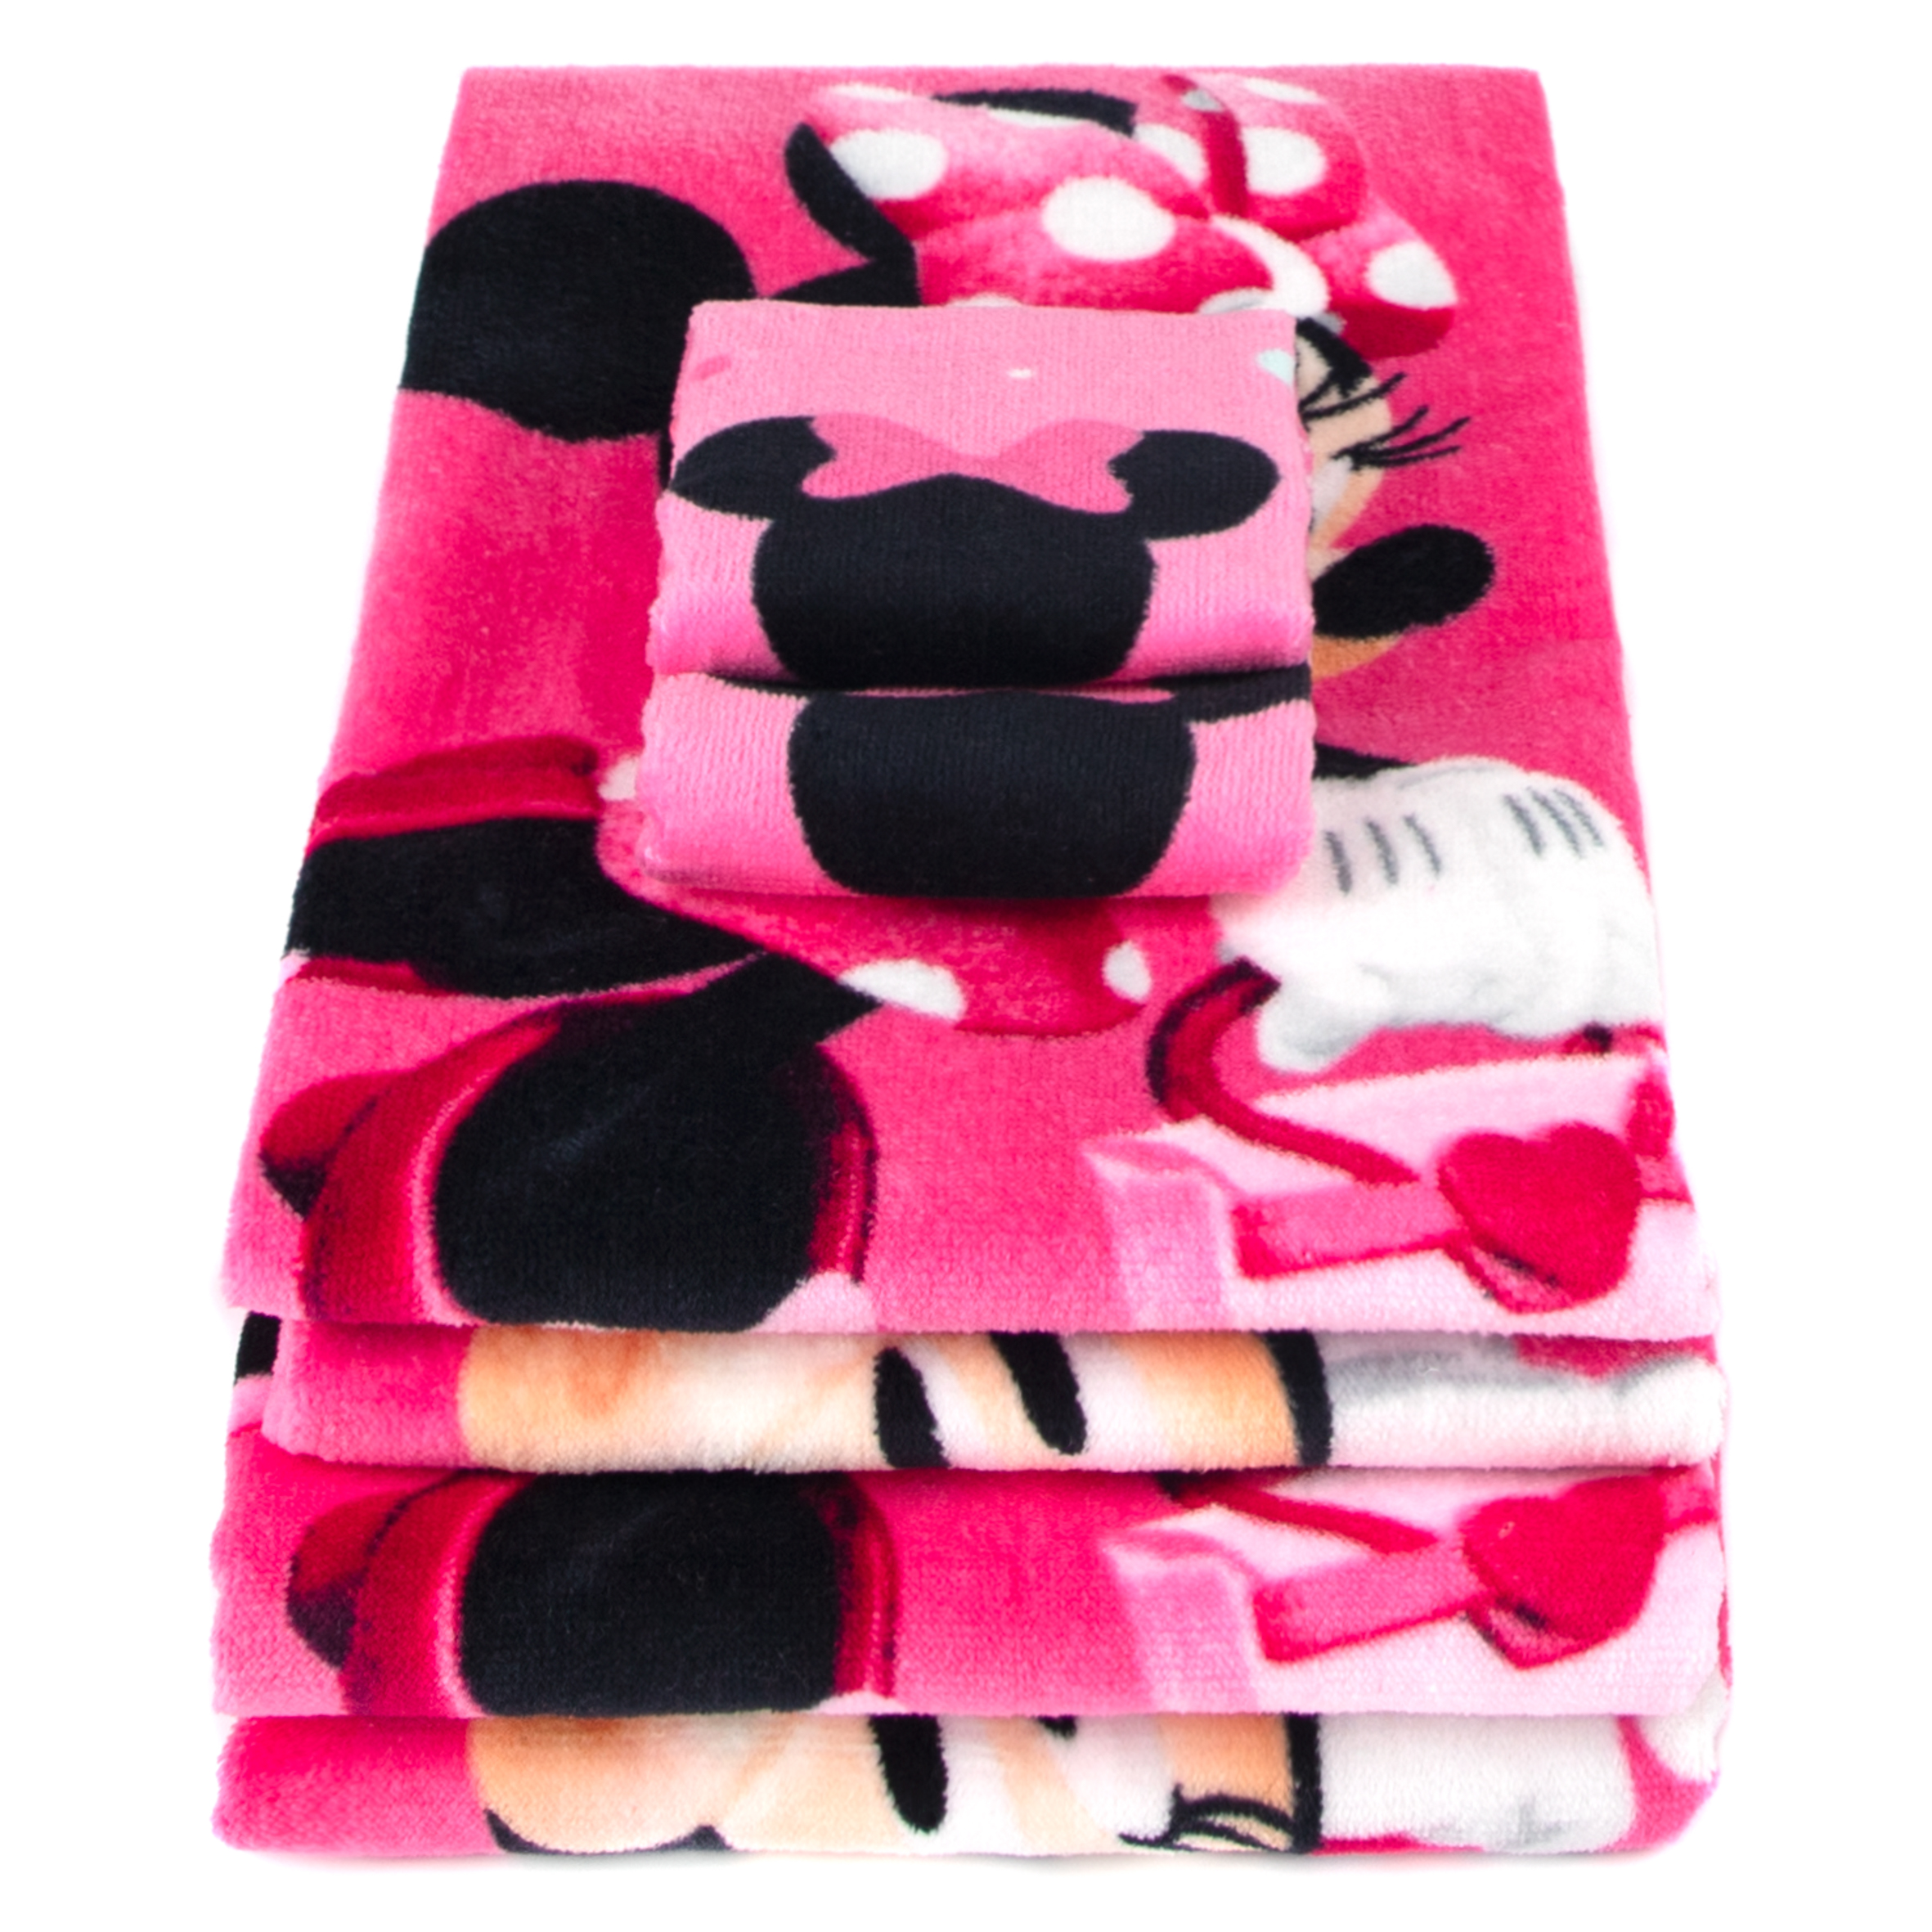 Minnie Mouse Kids Cotton 2 Piece Towel and Washcloth Set - image 6 of 8